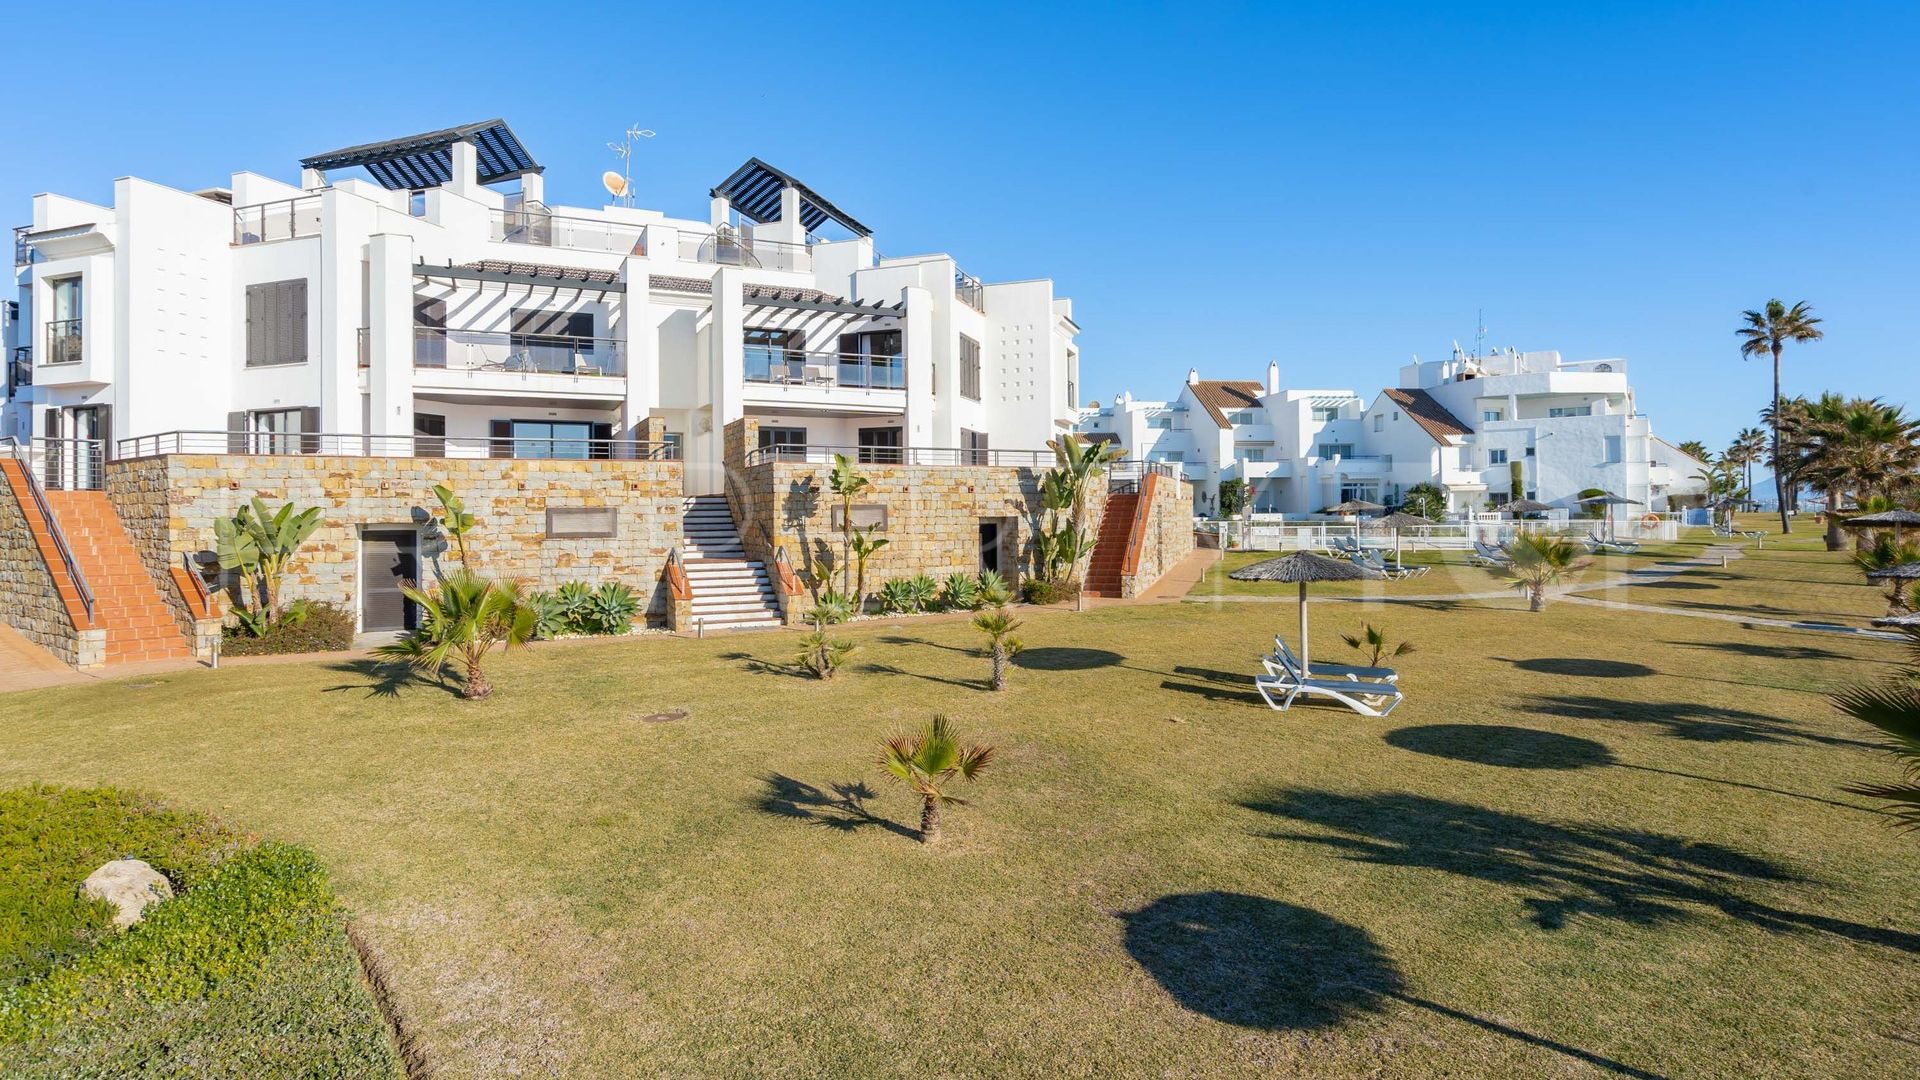 For sale Casares del Mar ground floor apartment with 2 bedrooms